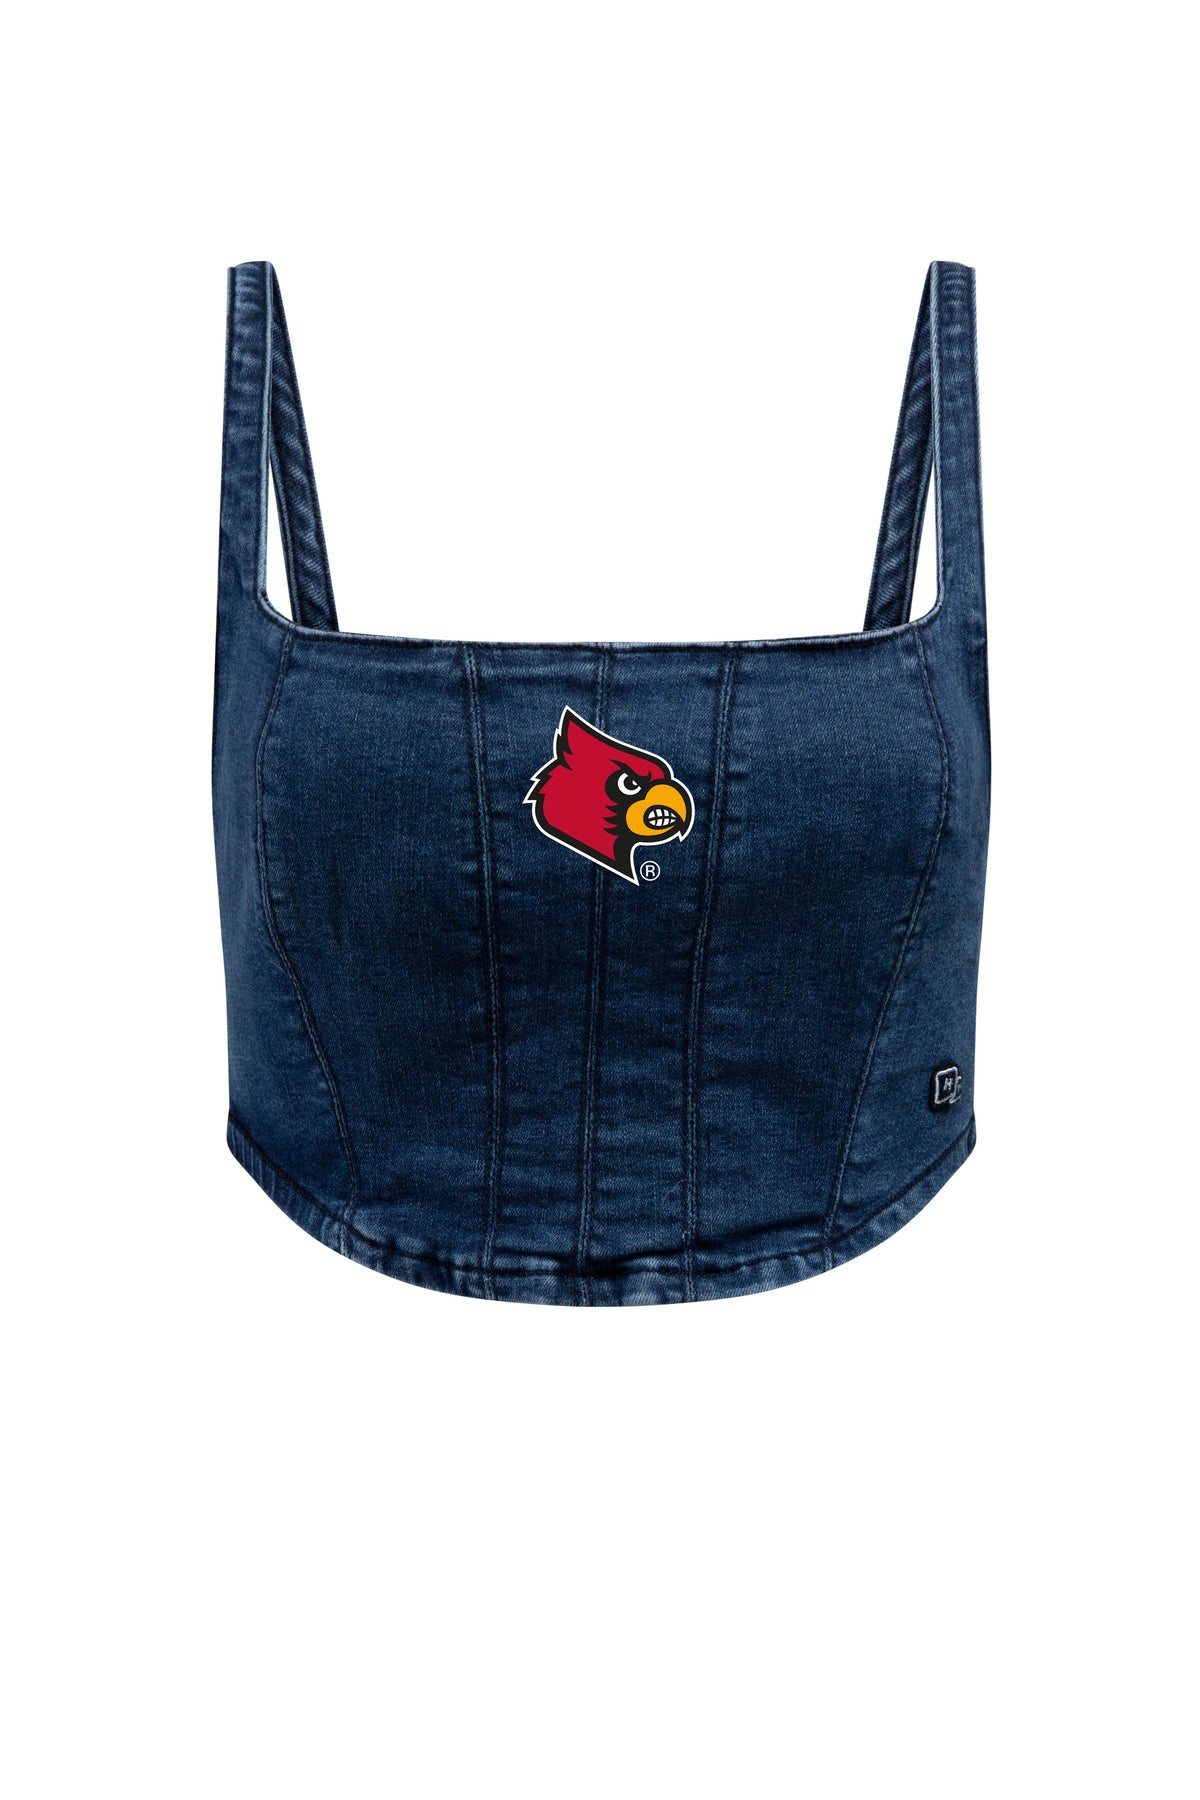 University of Louisville Apparel: Shop the Coolest UofL Gear Here!